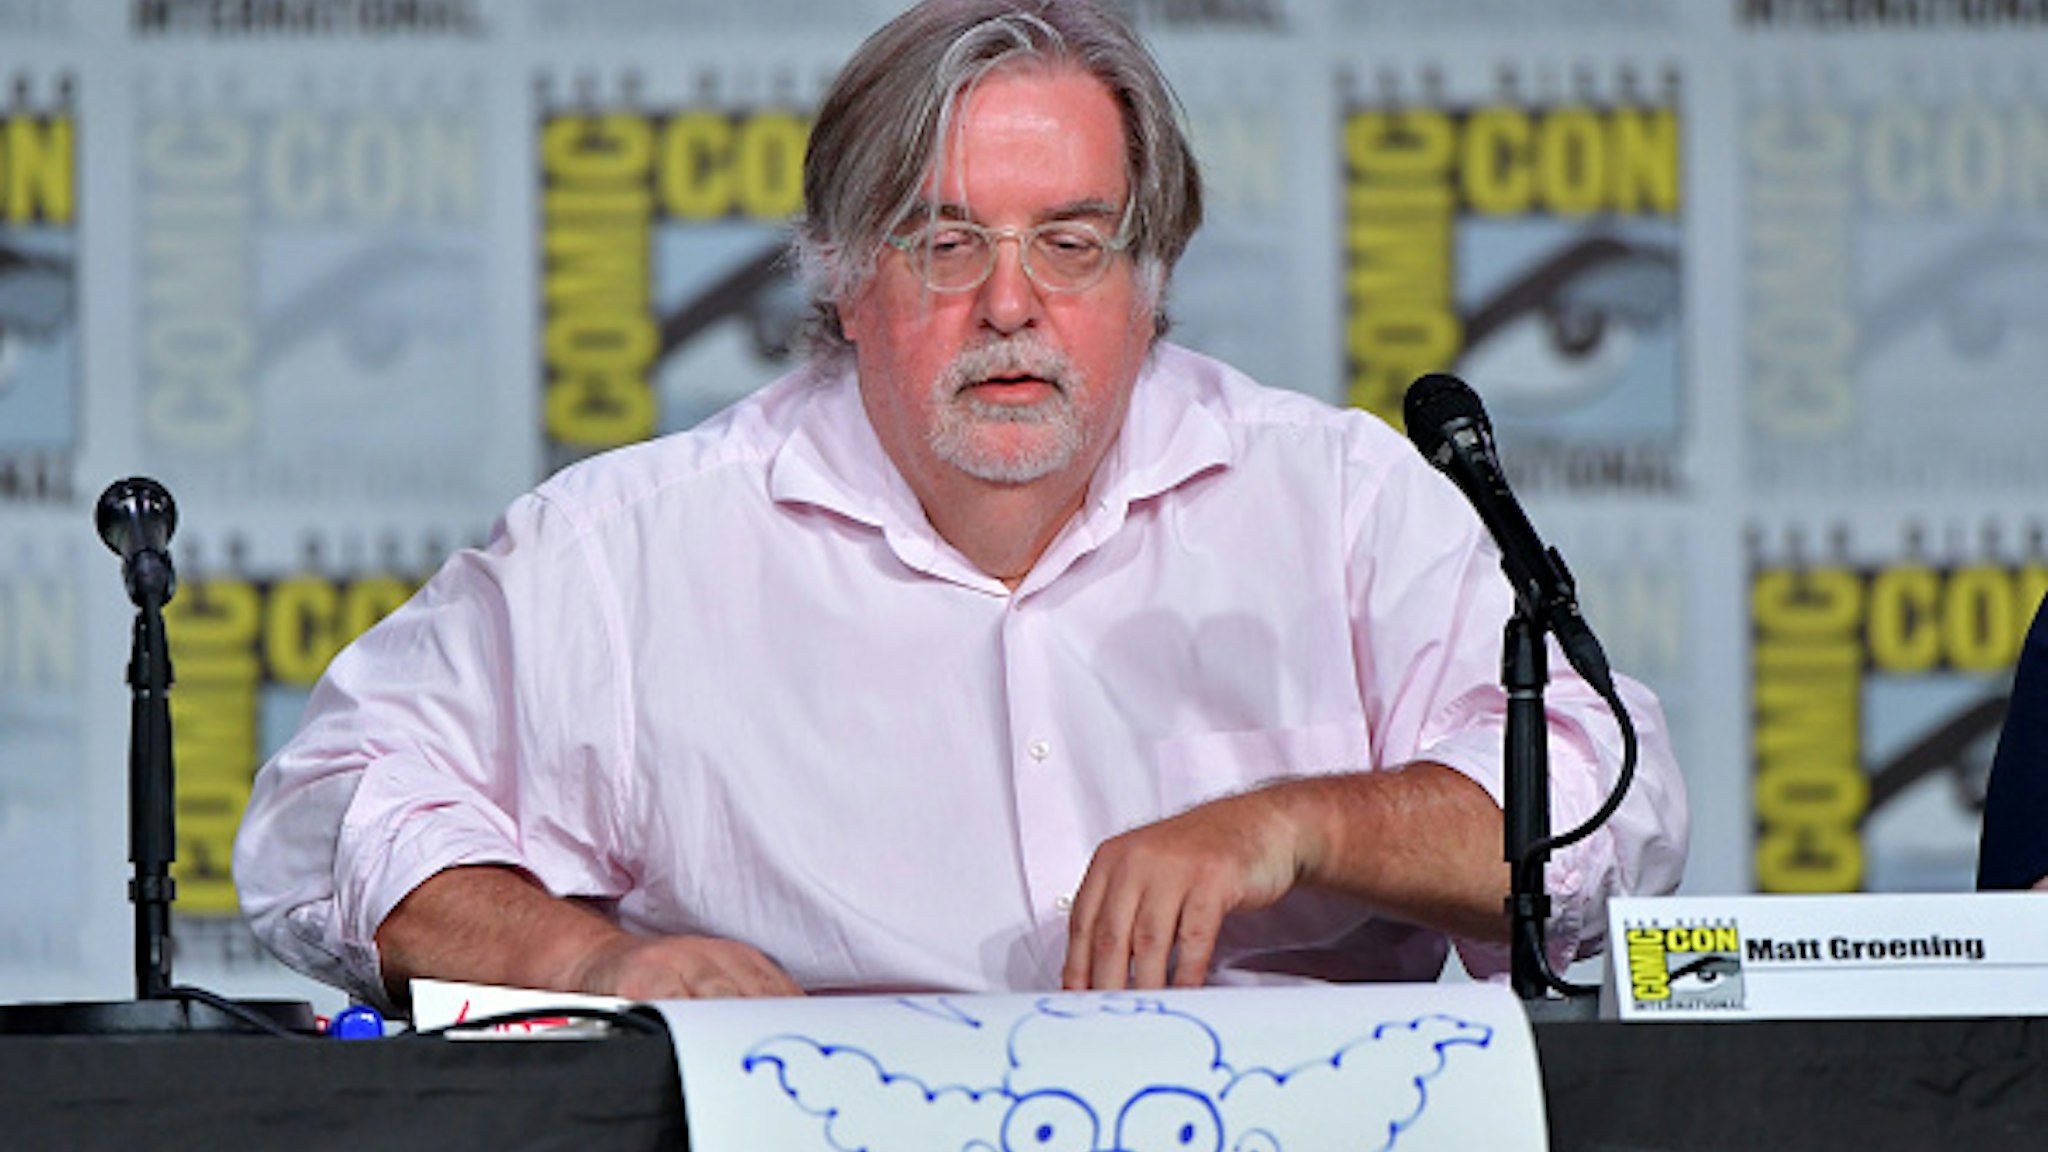 Matt Groening speaks at "The Simpsons" Panel during 2019 Comic-Con International at San Diego Convention Center on July 20, 2019 in San Diego, California.